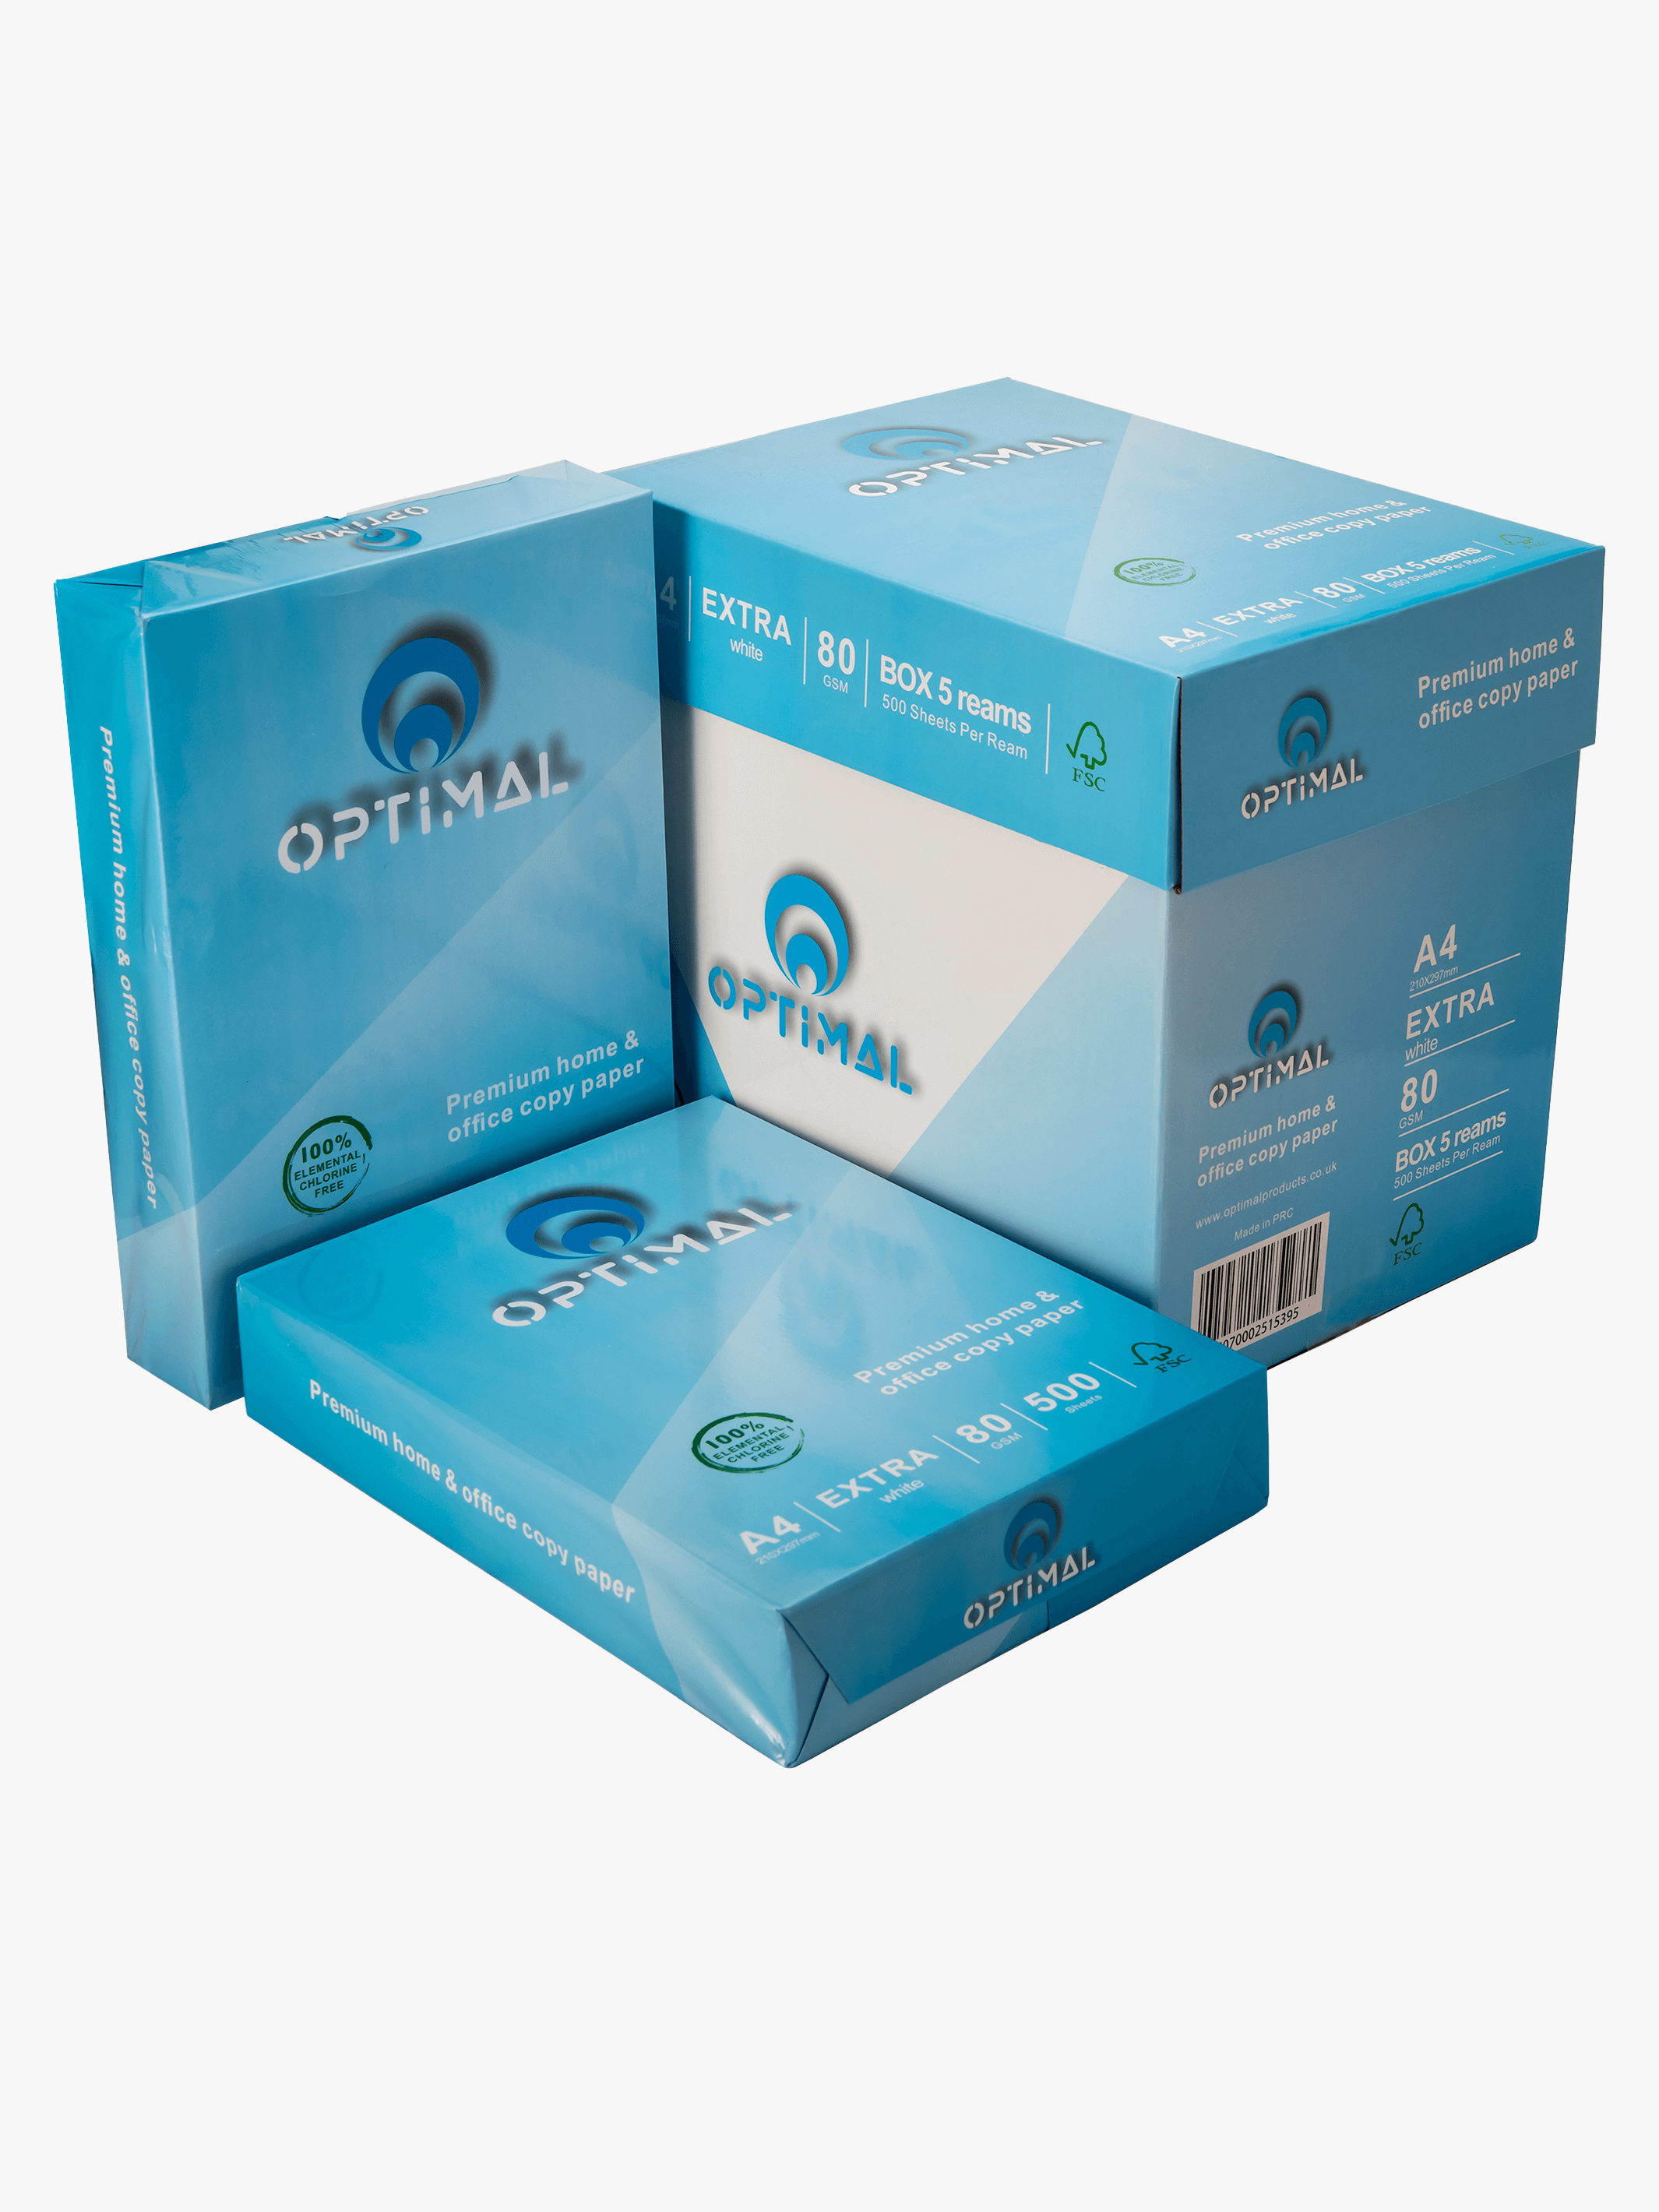 OPTIMAL A4 COPY PRINTER PAPER 80 GSM SMOOTH WHITE 500 SHEETS 2500 SHEETS PREMIUM BUSINESS